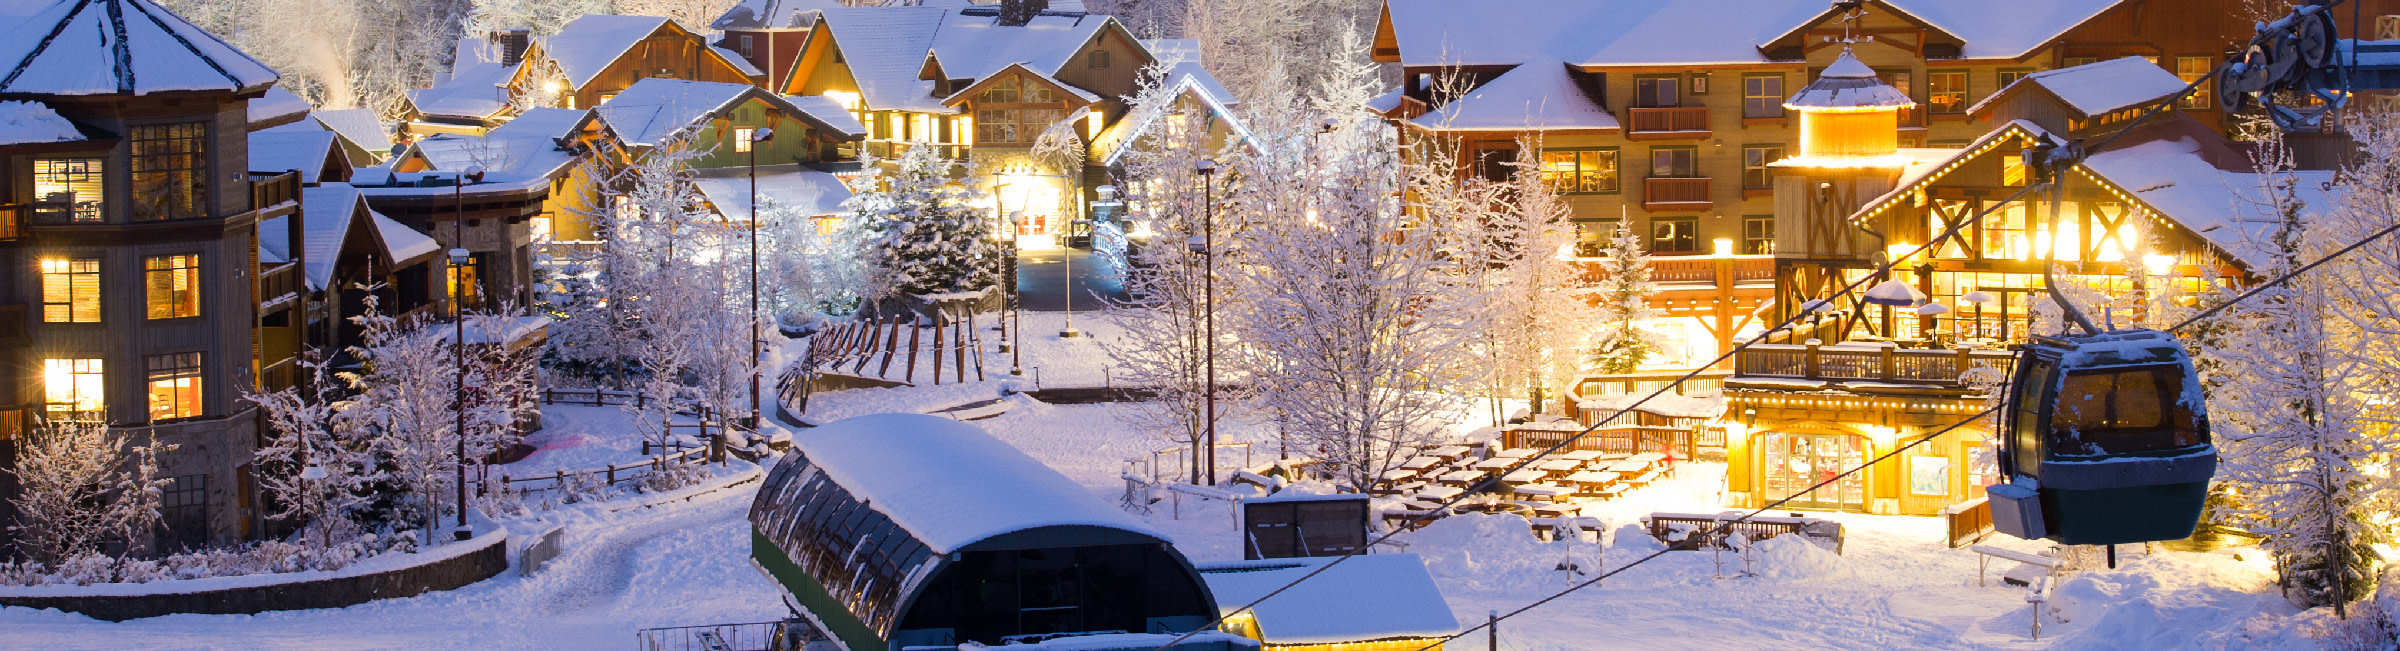 Snow-covered chalets look peaceful in the evening light.